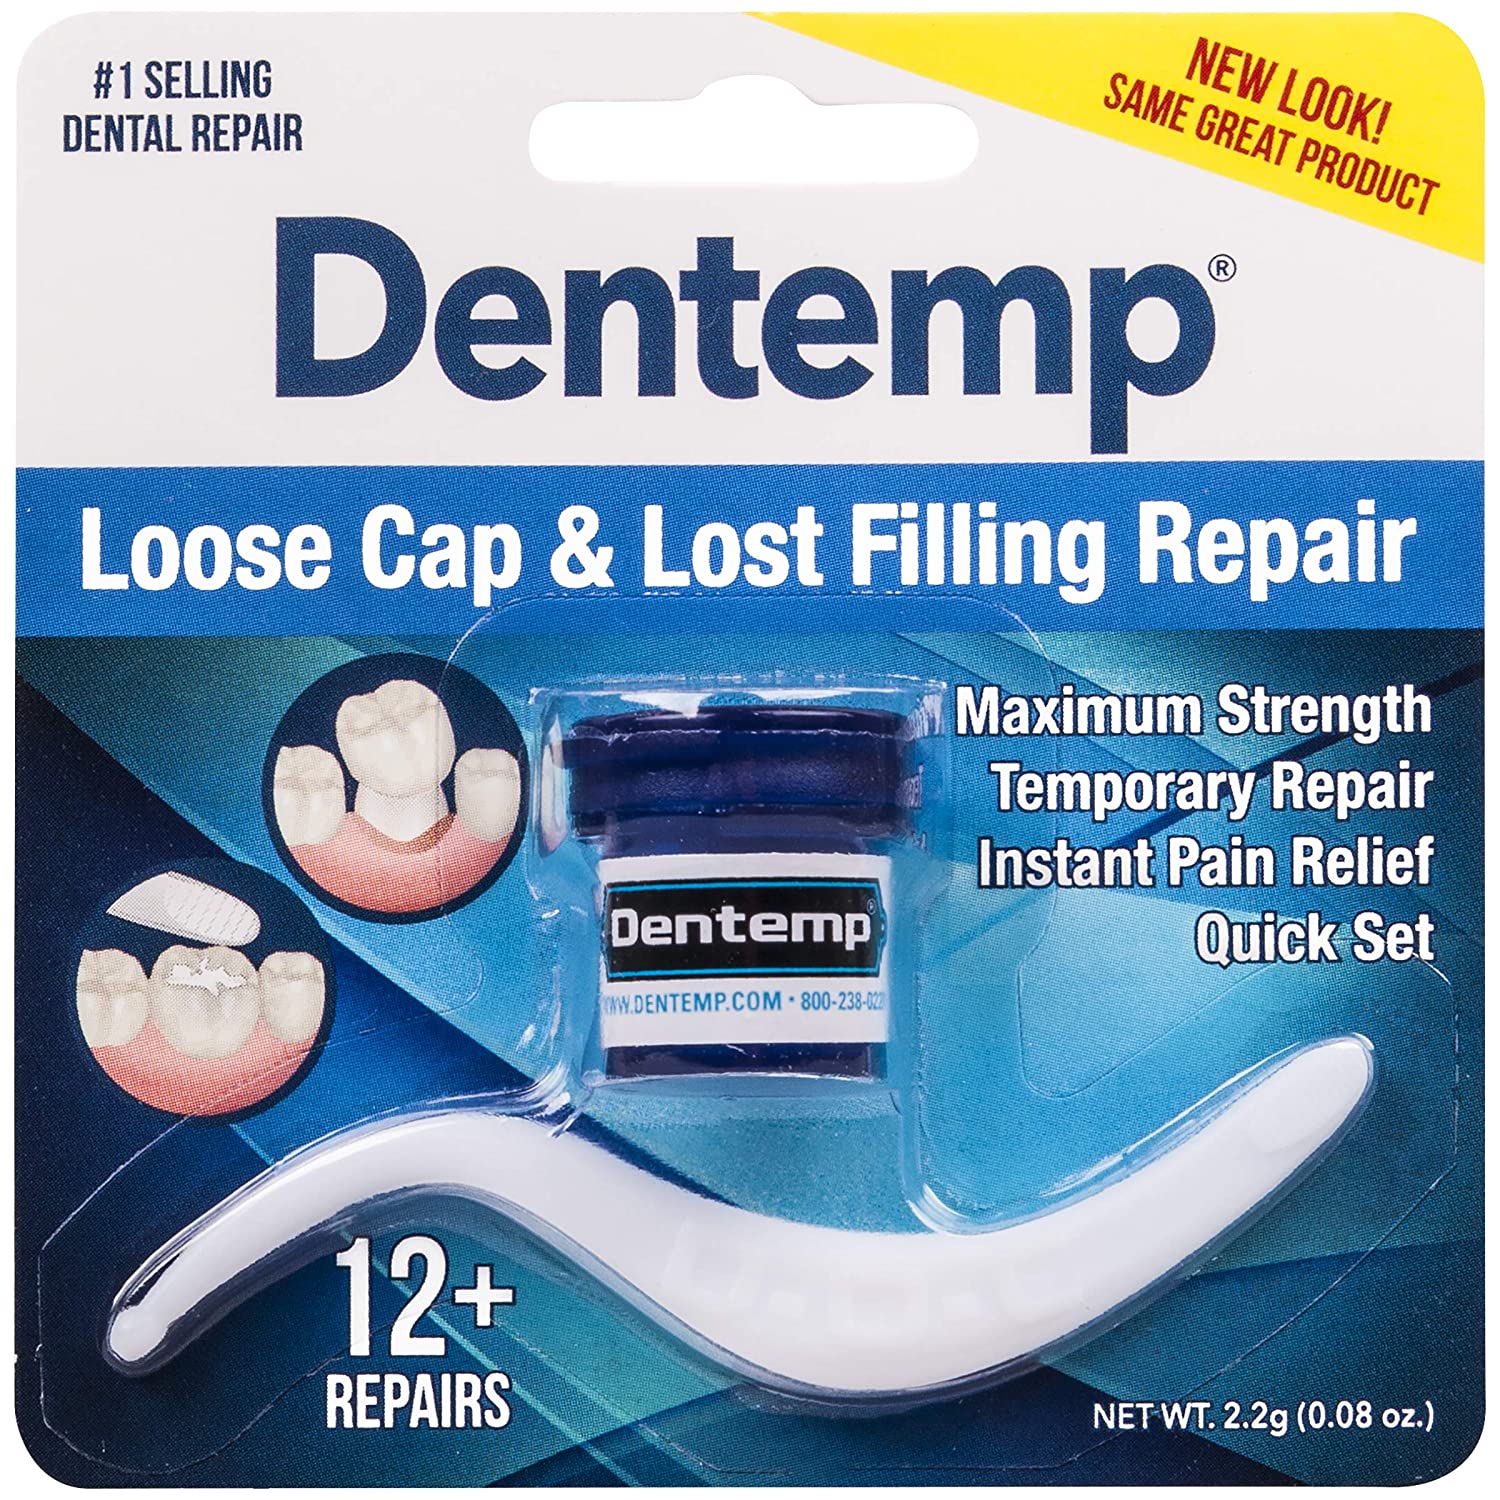 Diy Tooth Filling / Denseal DIY Permanent Dental Cement White Teeth Tooth ... - Home tooth ...